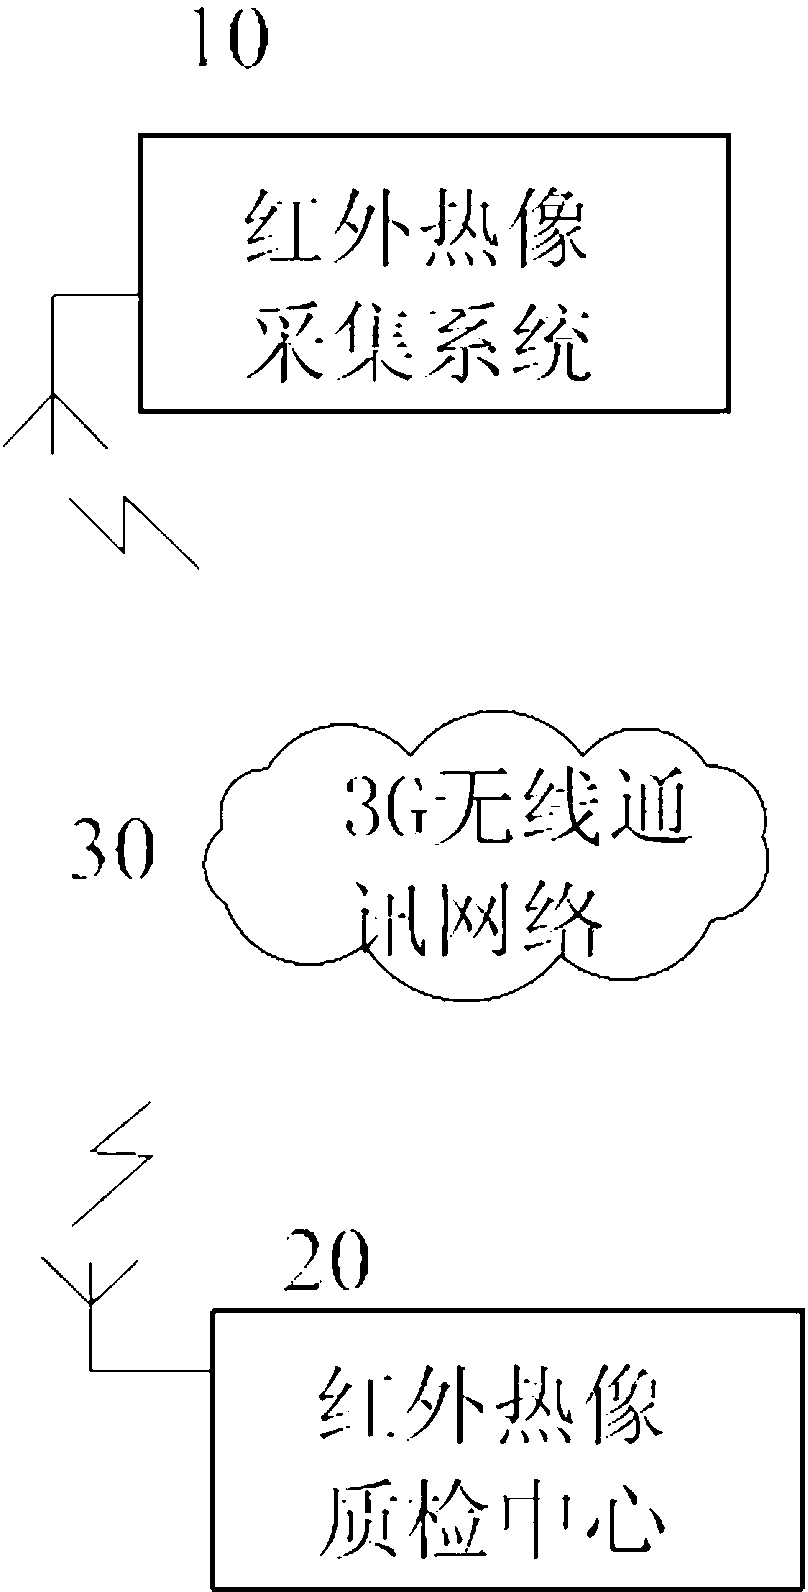 Remote pavement construction diagnosis system and method based on infrared thermal image of third-generation (3G) network